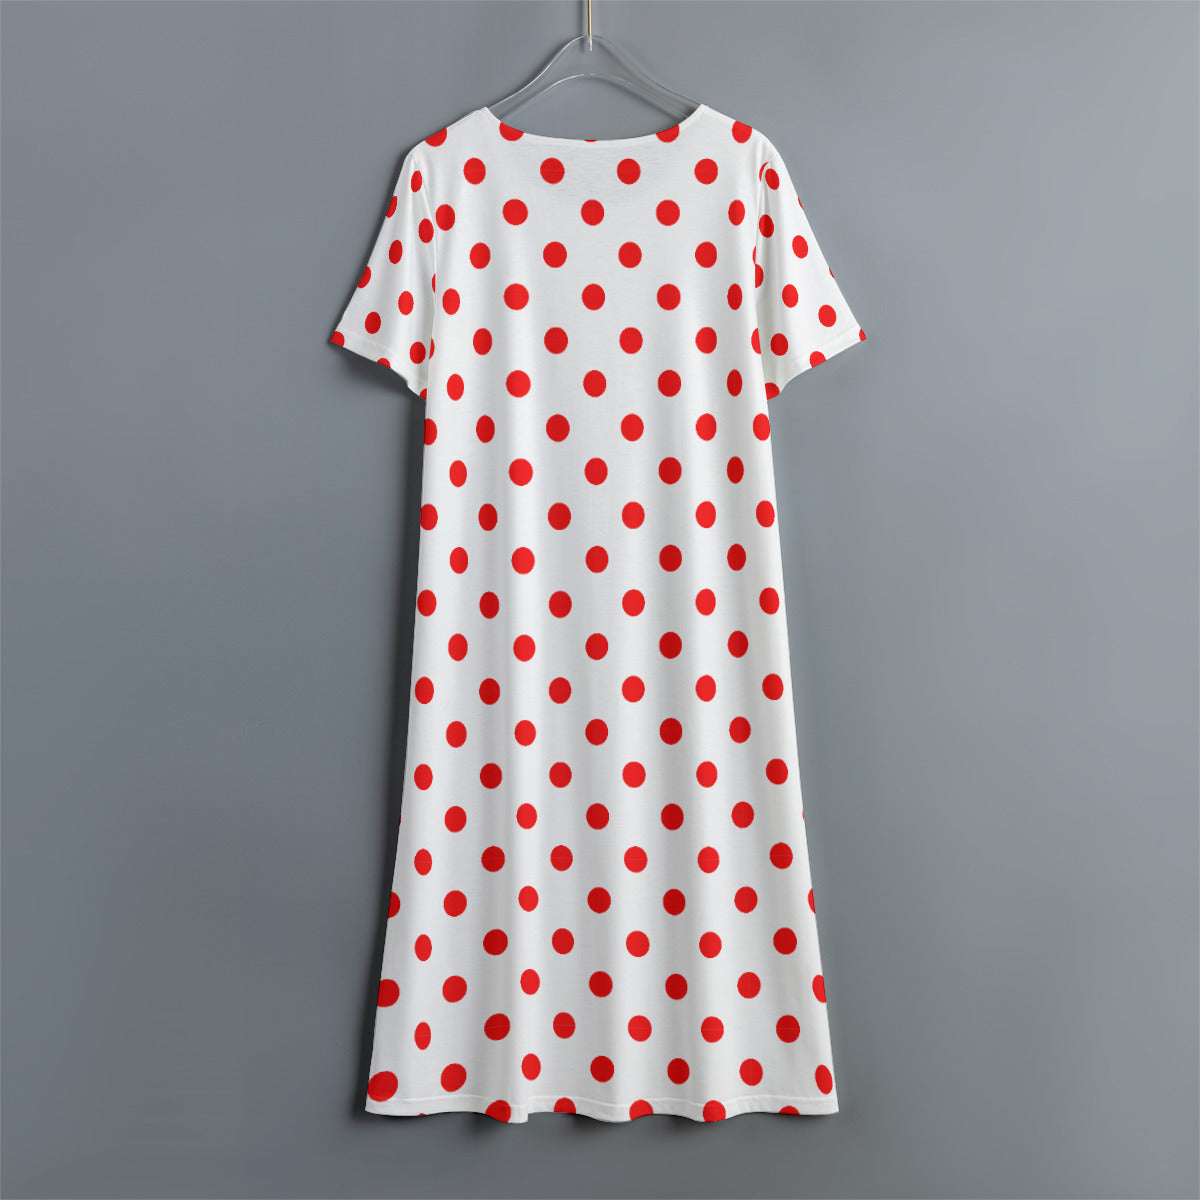 All-Over Print Women's Dress With Short Sleeve